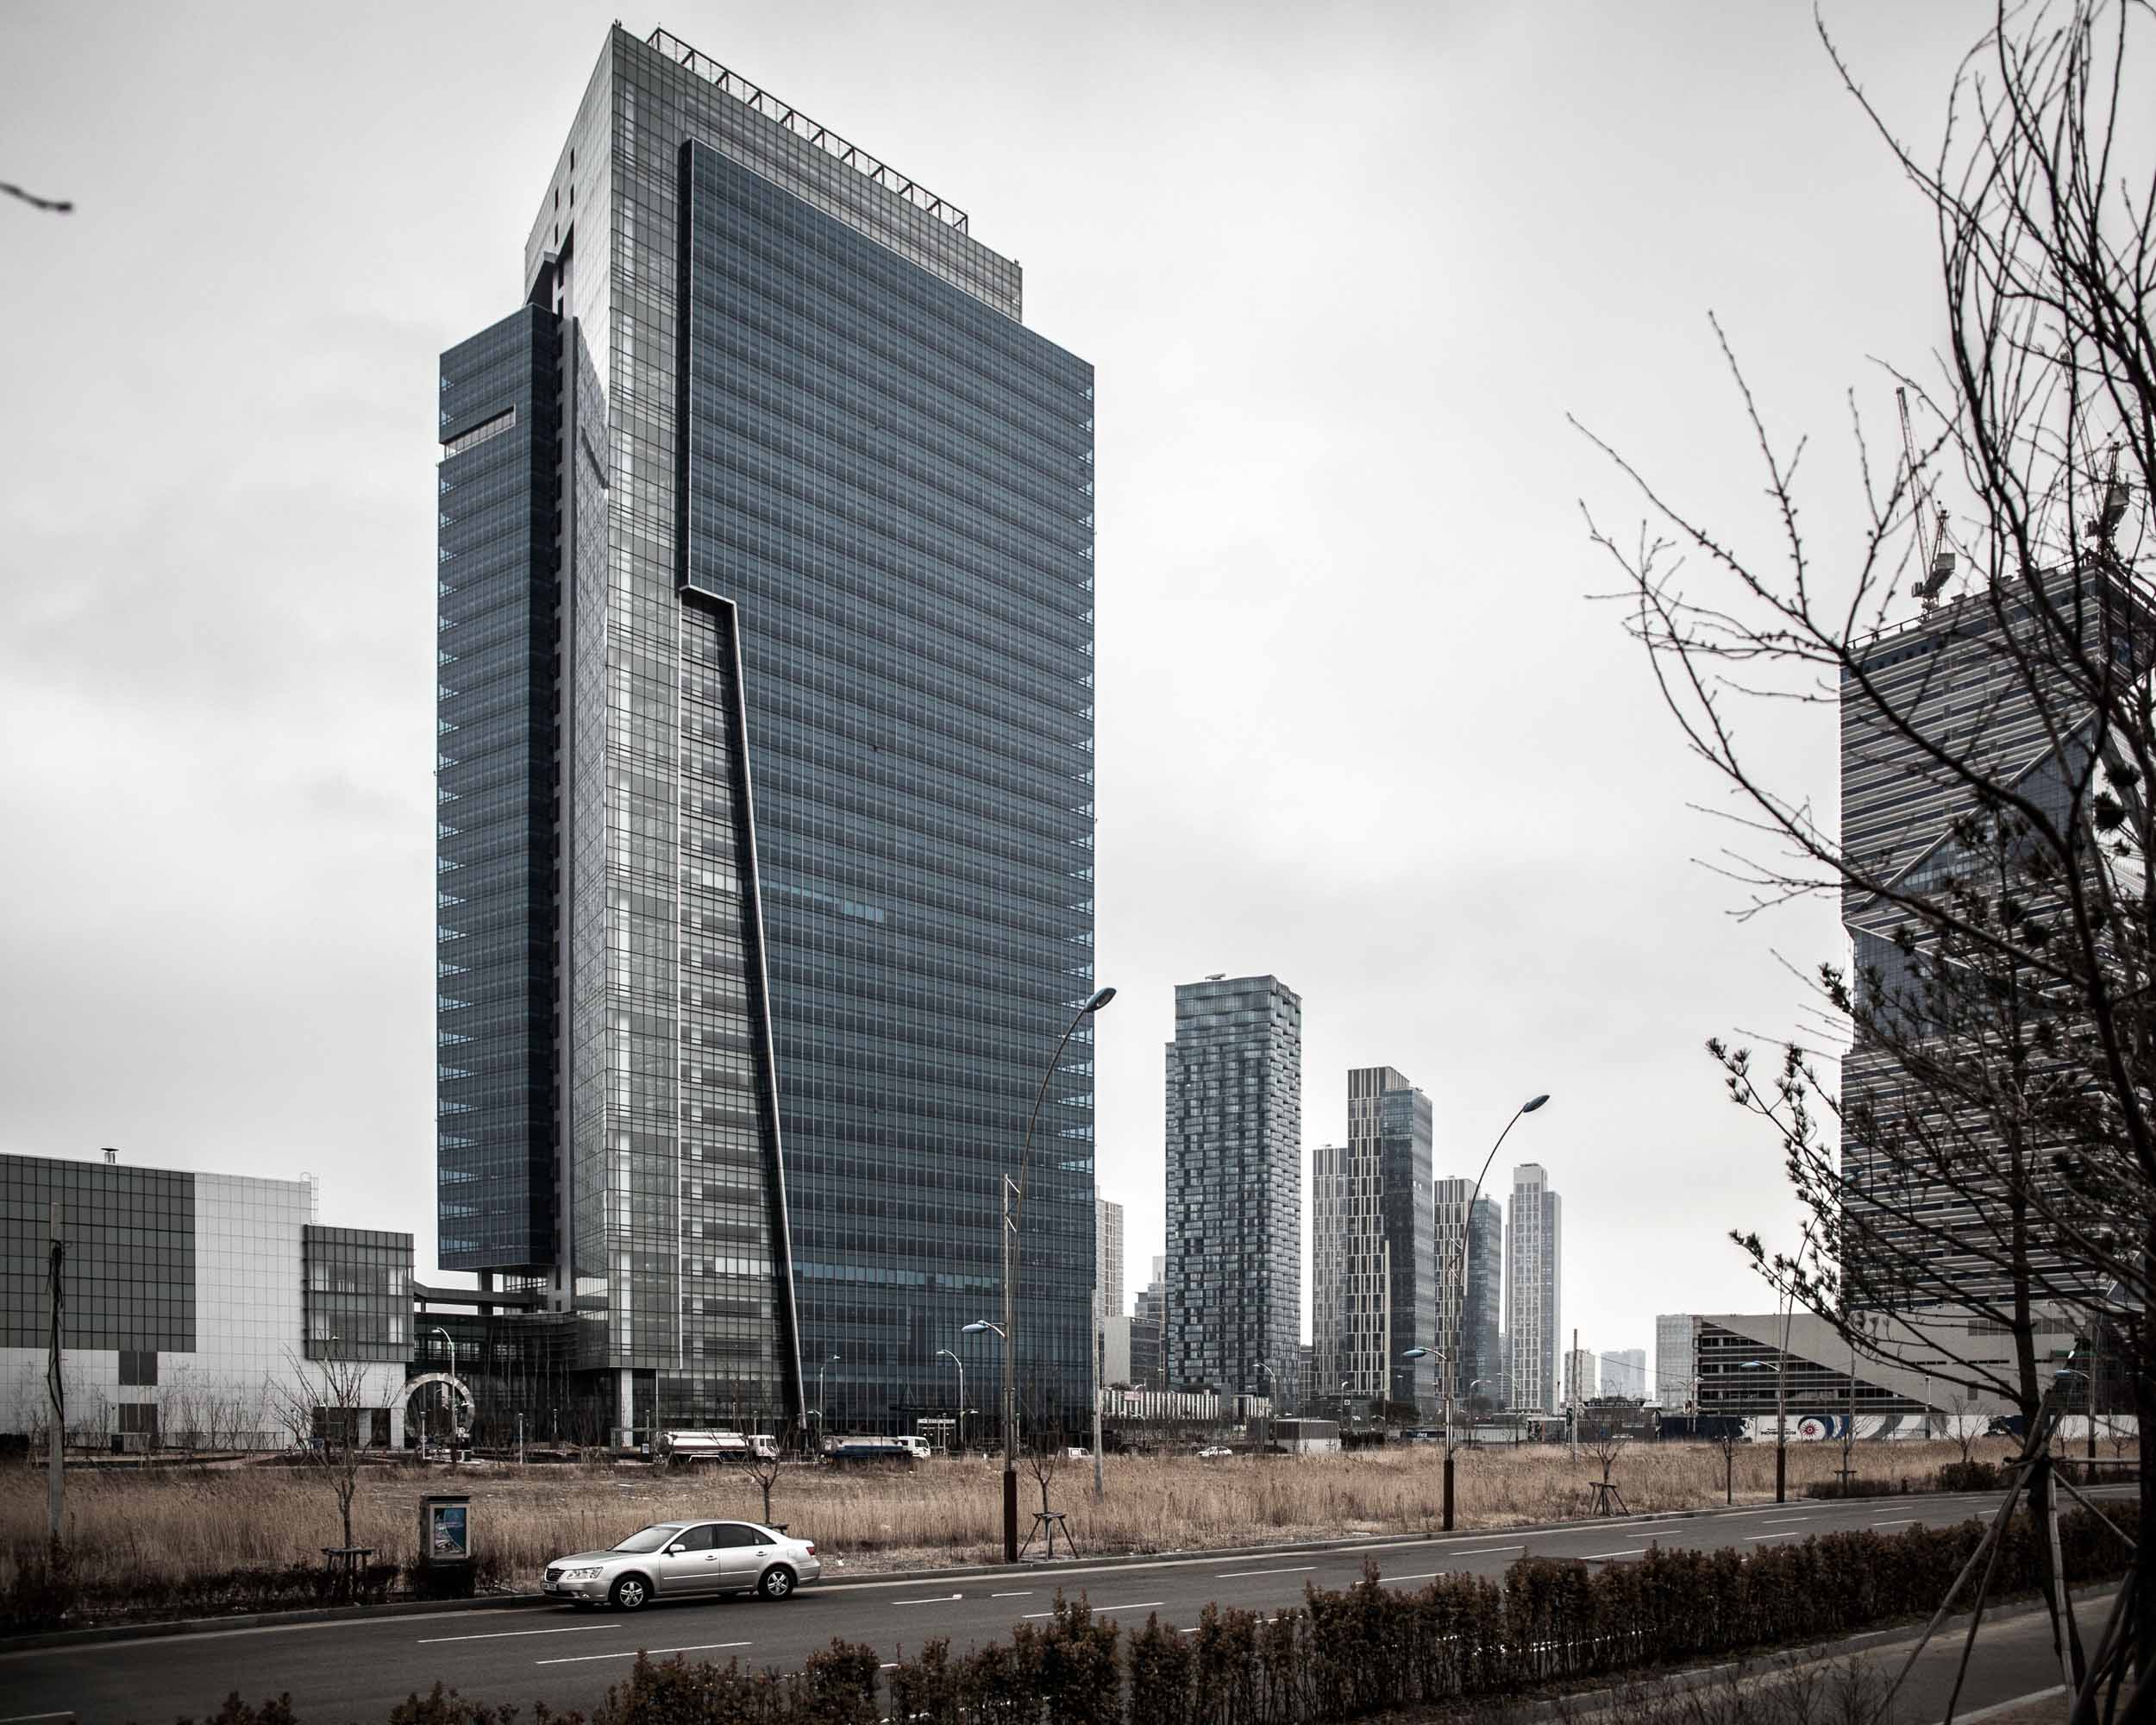  Songdo International Business District (SIBD) is a new Smart City or Ubiquitous City built from scratch on 1,500 acres of reclaimed land along Incheon's waterfront, &nbsp;40 miles southwest of Seoul, South Korea and connected to Incheon Internationa